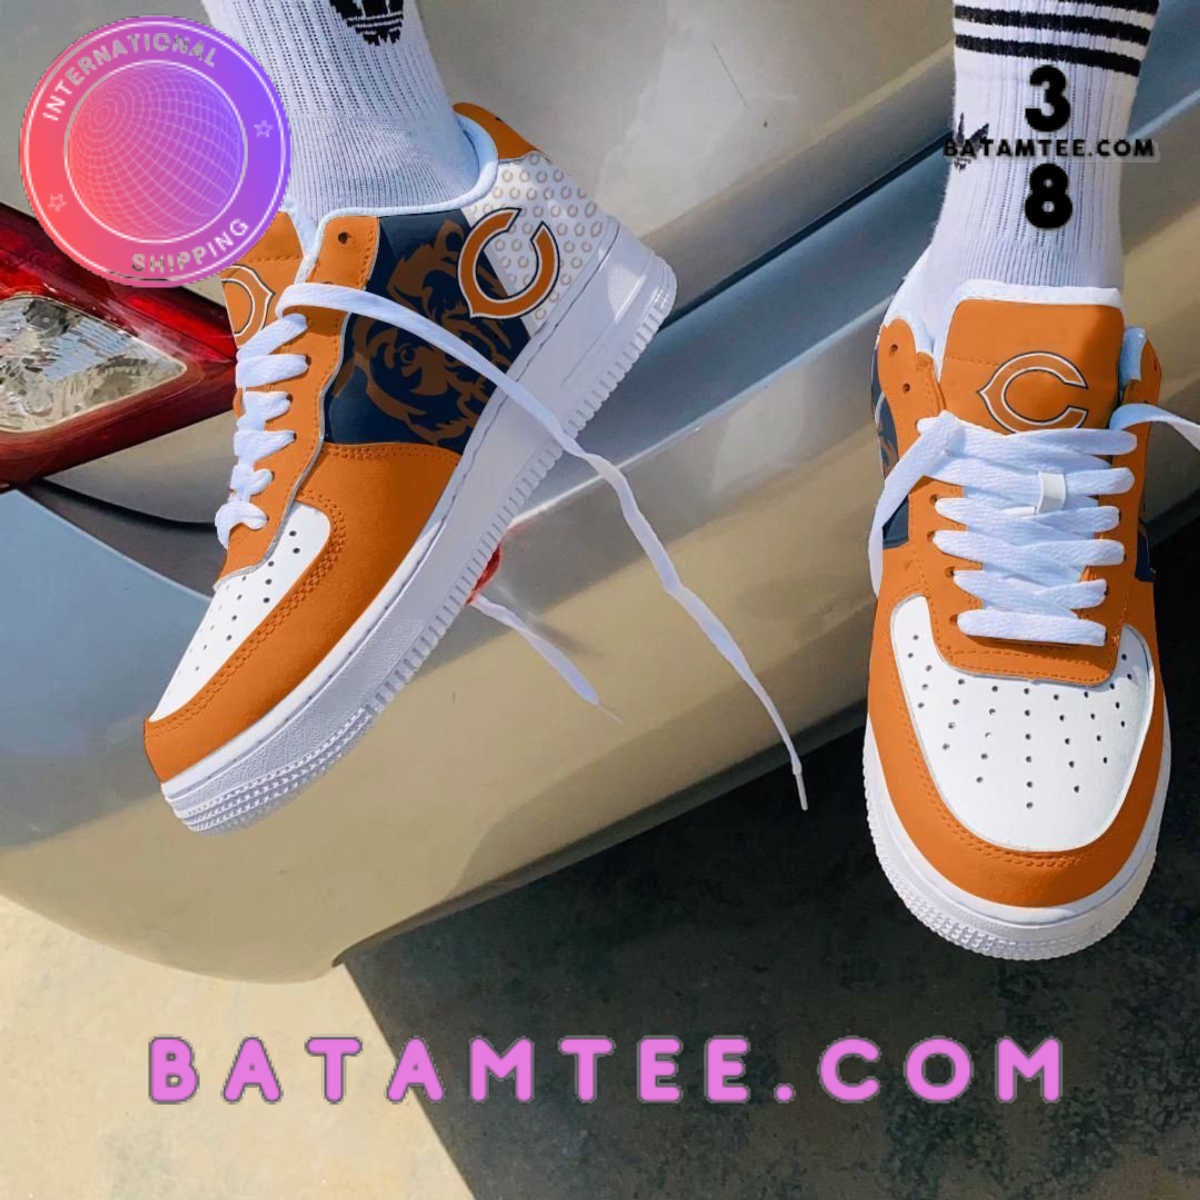 Chicago Bears Orange Air Force 1 Sneakers's Overview - Batamtee Shop - Threads & Totes: Your Style Destination